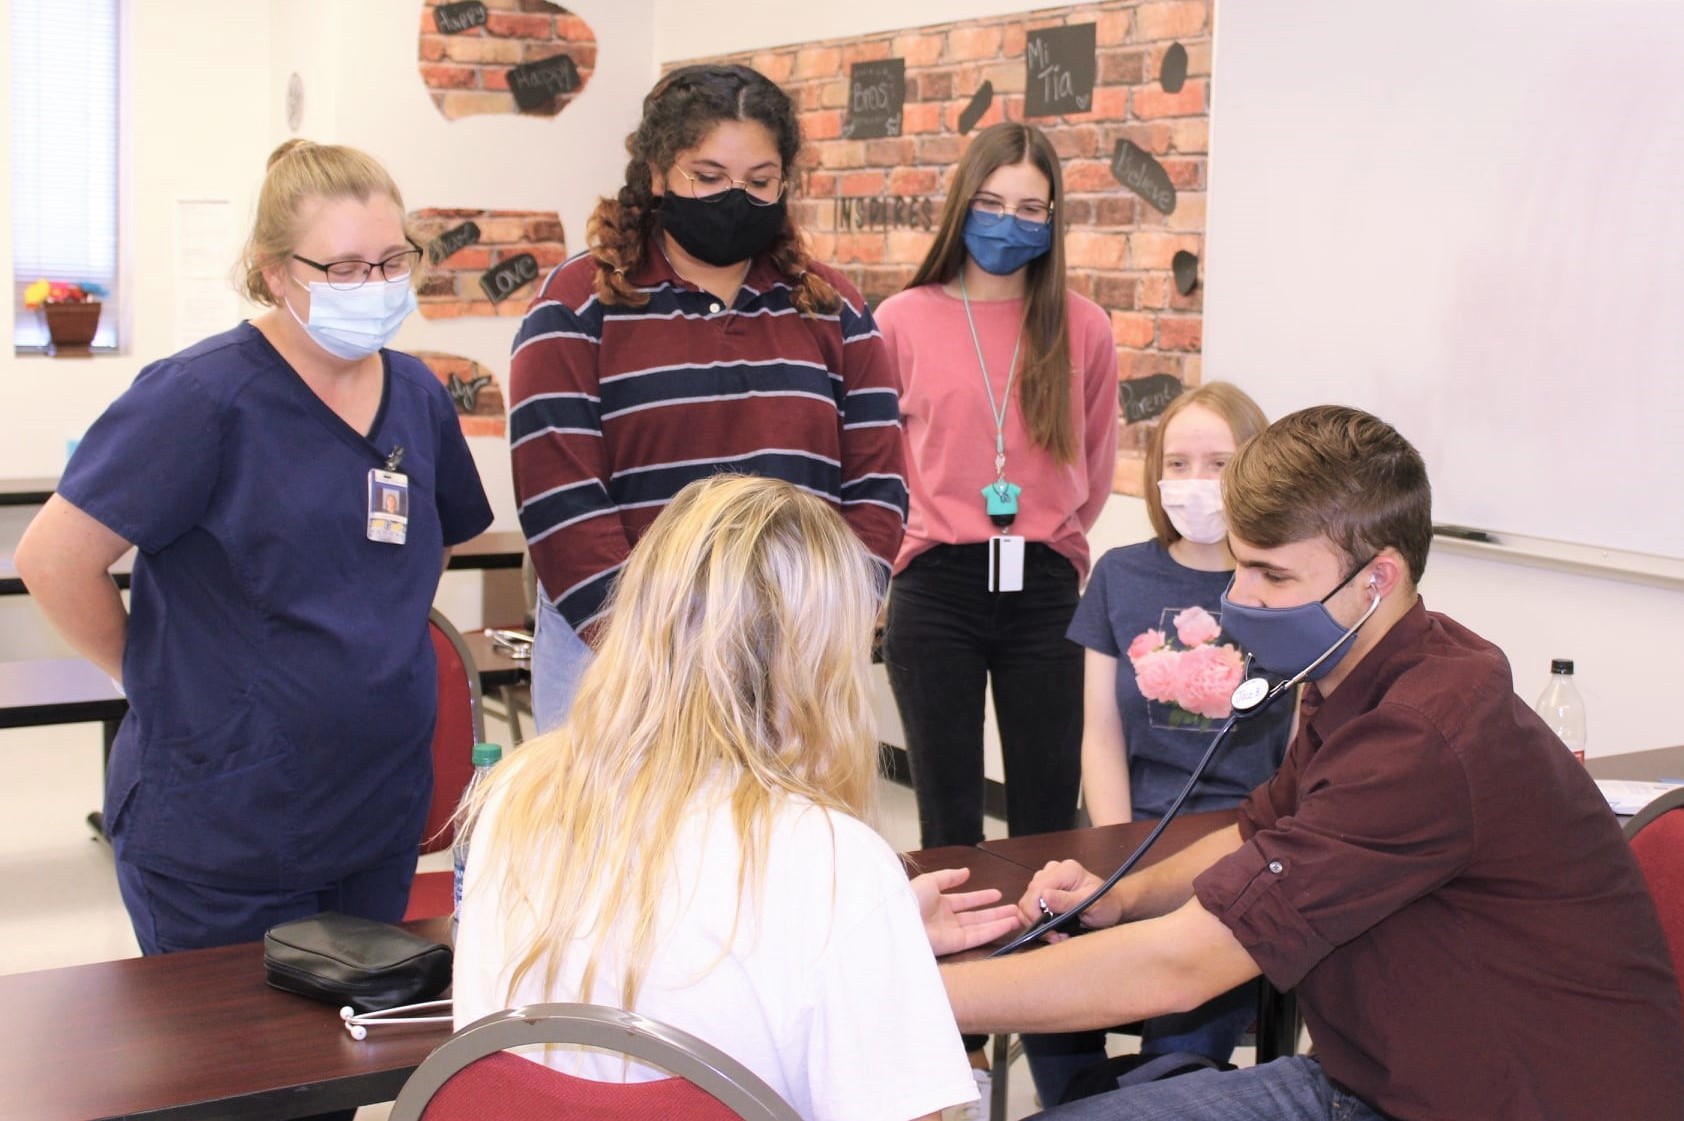 Health Science students watch a student check a patient with a stethoscope